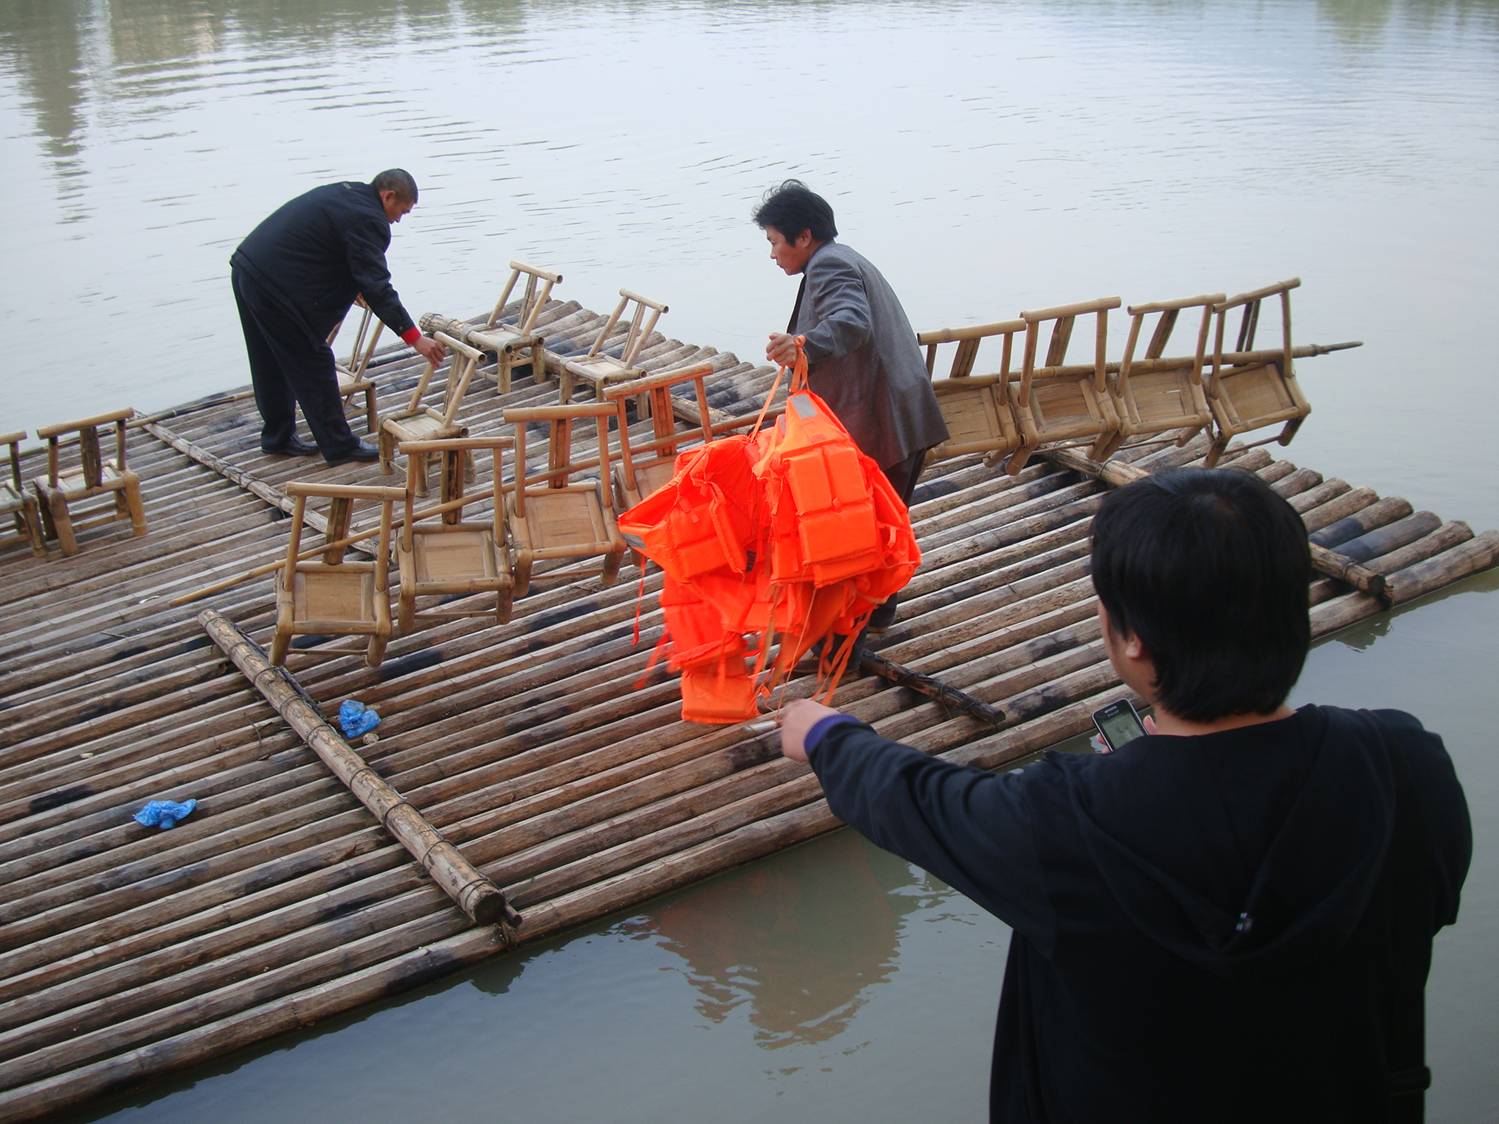 Picture:  Chairs and life jackets are placed for our river rafting adventure.  Zhejiang Province, China